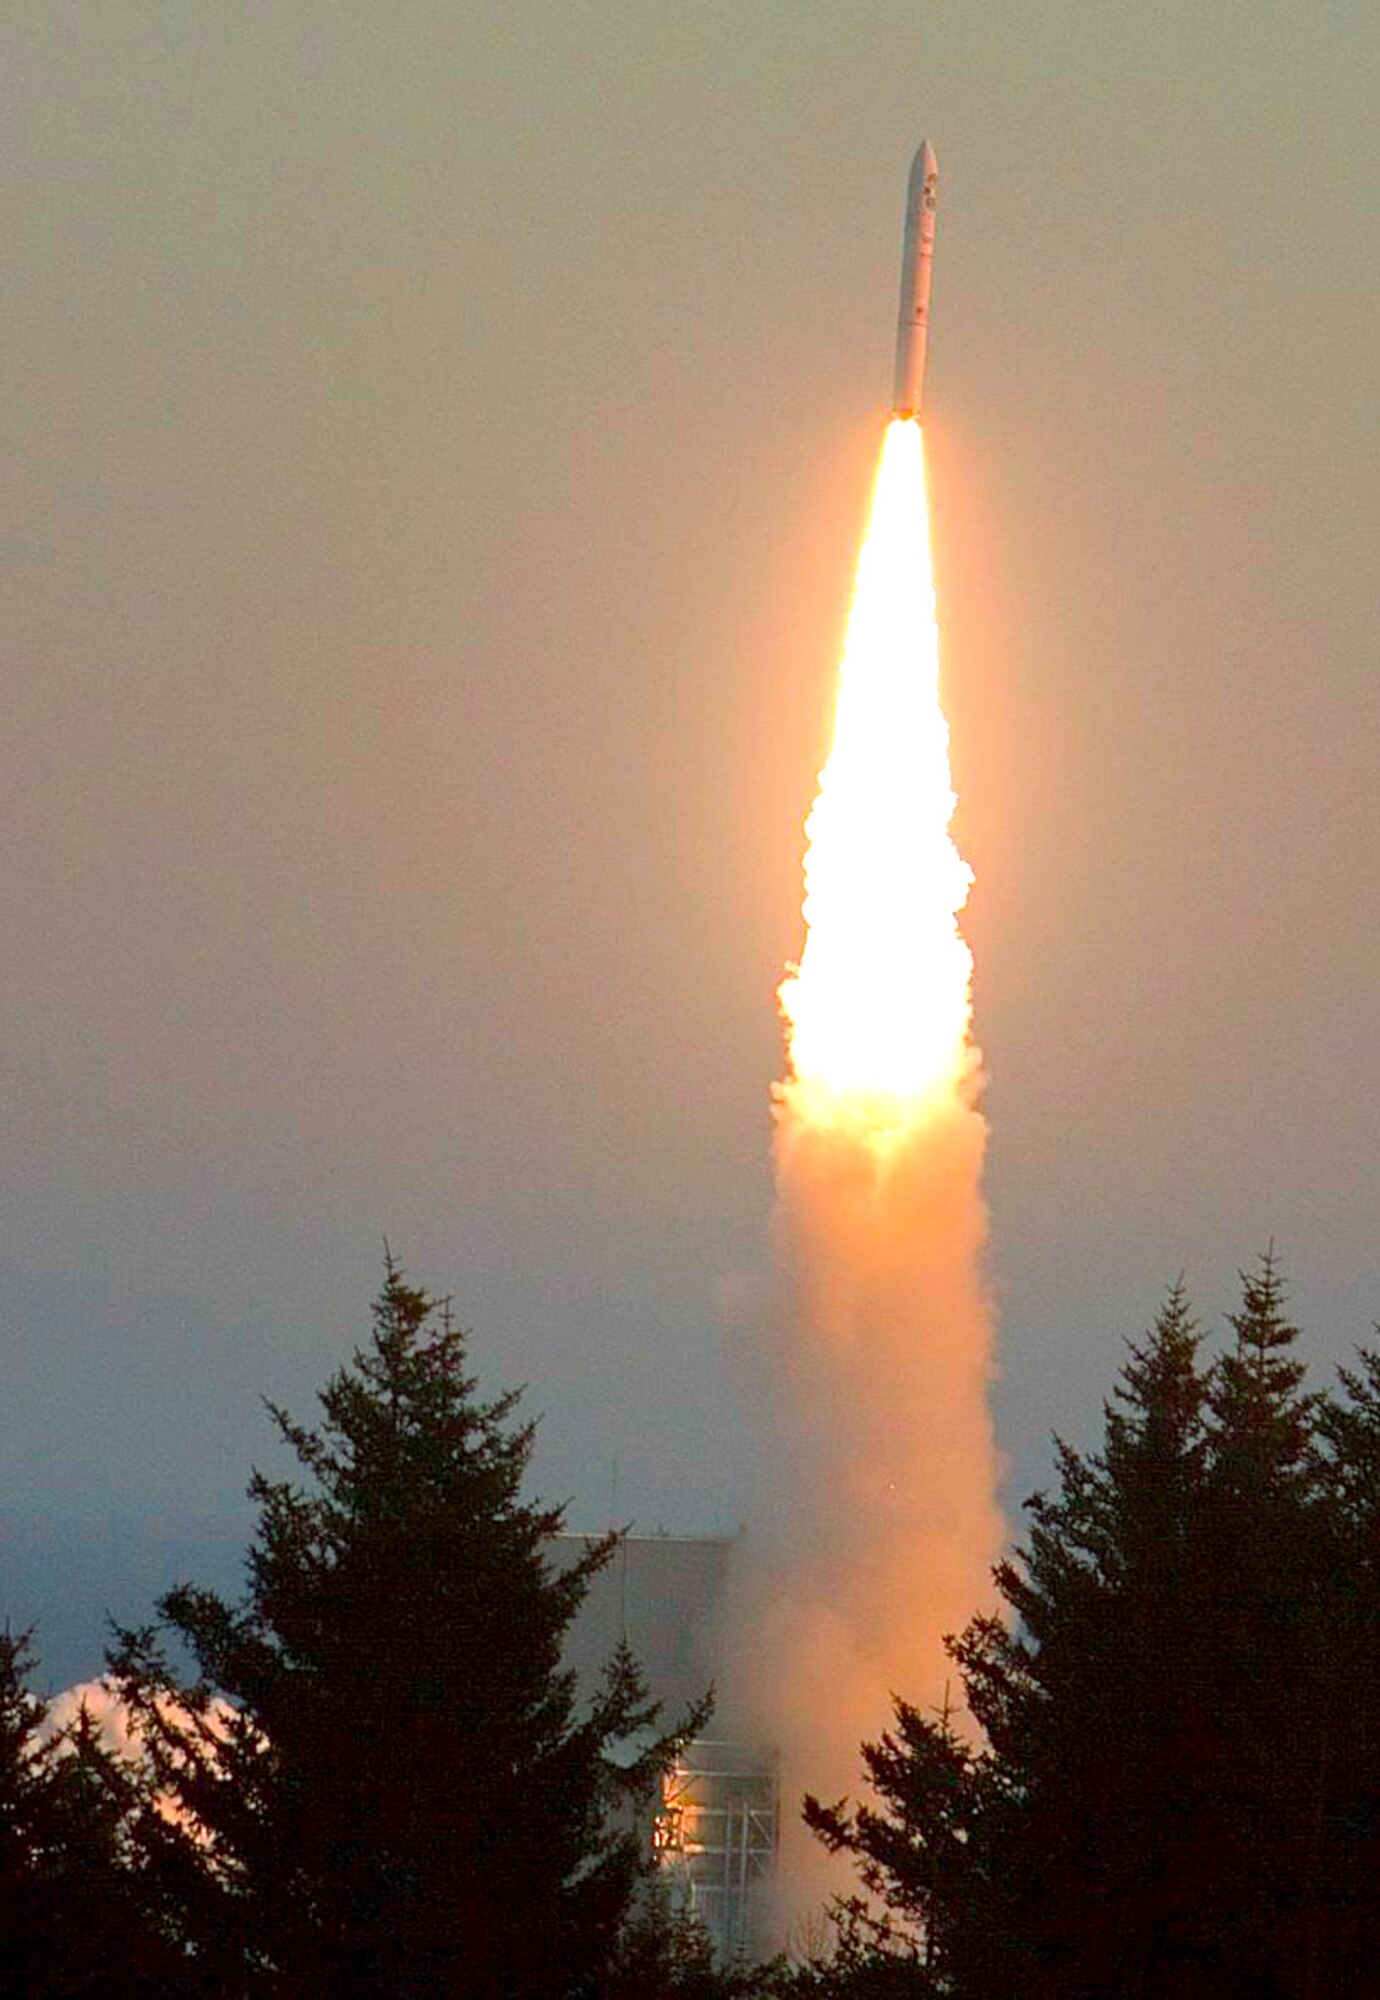 A rocket carrying the Air Force Academy's FalconSAT-5 satellite lifts off from the Kodiak Launch Complex in Alaska Nov. 19, 2010. FalconSAT is a capstone program that allows Academy cadets to design, build, test and operate a satellite. FalconSAT-5 carried Space Test Program payloads to measure measure the ionosphere and its effects on radio frequency signals. (U.S. Air Force photo/Col. Marty France)